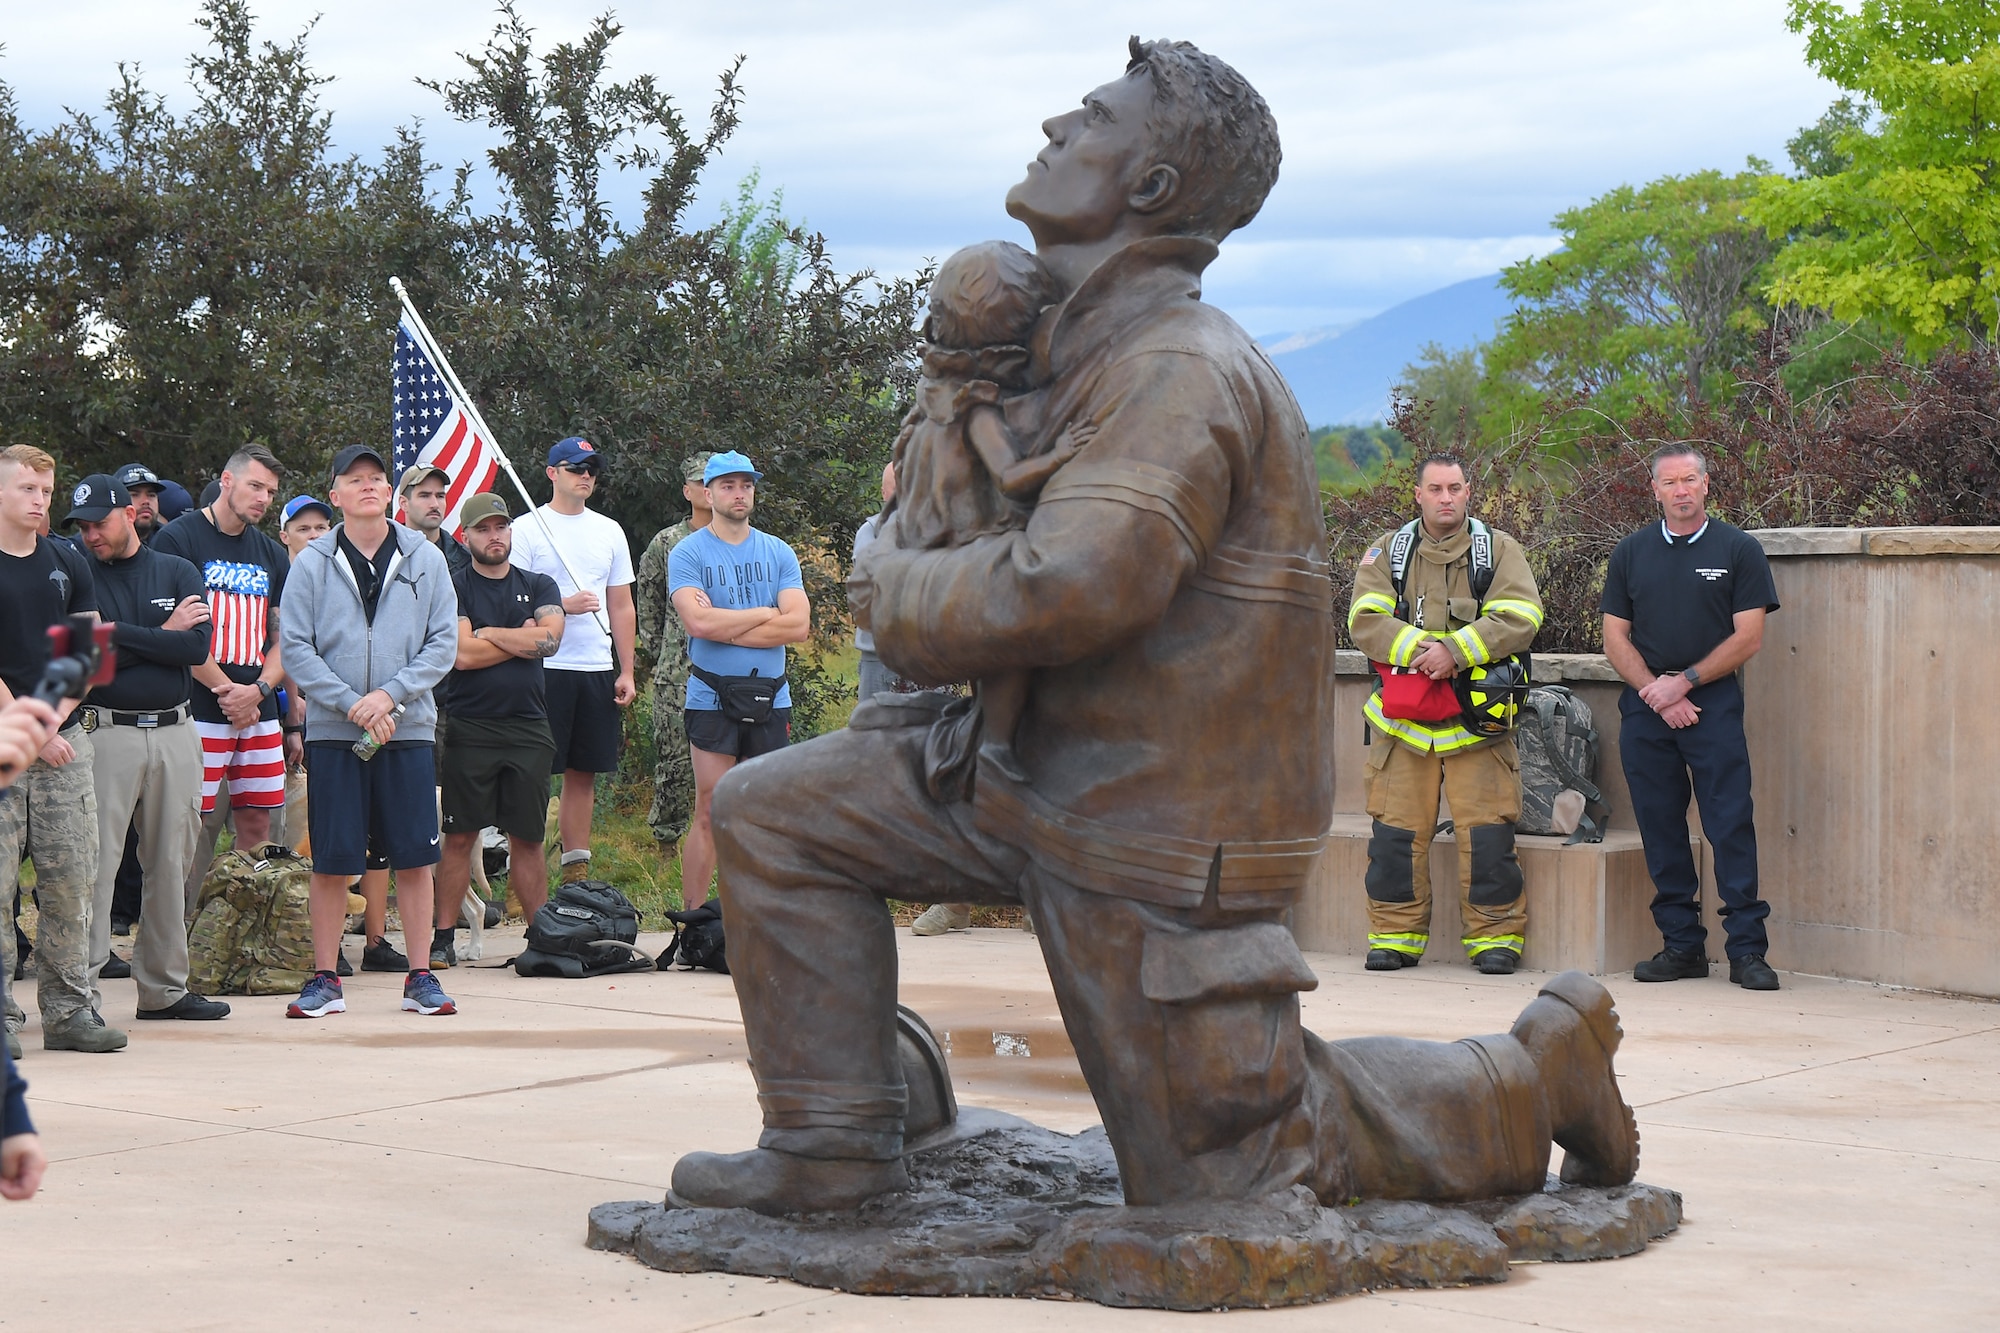 Participants listen to a remembrance speech during the opening ceremony of the 9/11 Memorial Ruck March, at the Utah State University Botanical Gardens in Kaysville, Utah, Sept. 11, 2019. The event was co-sponsored by Hill Air Force Base first responders and fire and police departments from Kaysville and Layton, to honor and remember the fallen from the events of Sept. 11, 2001. (U.S. Air Force photo by Todd Cromar)